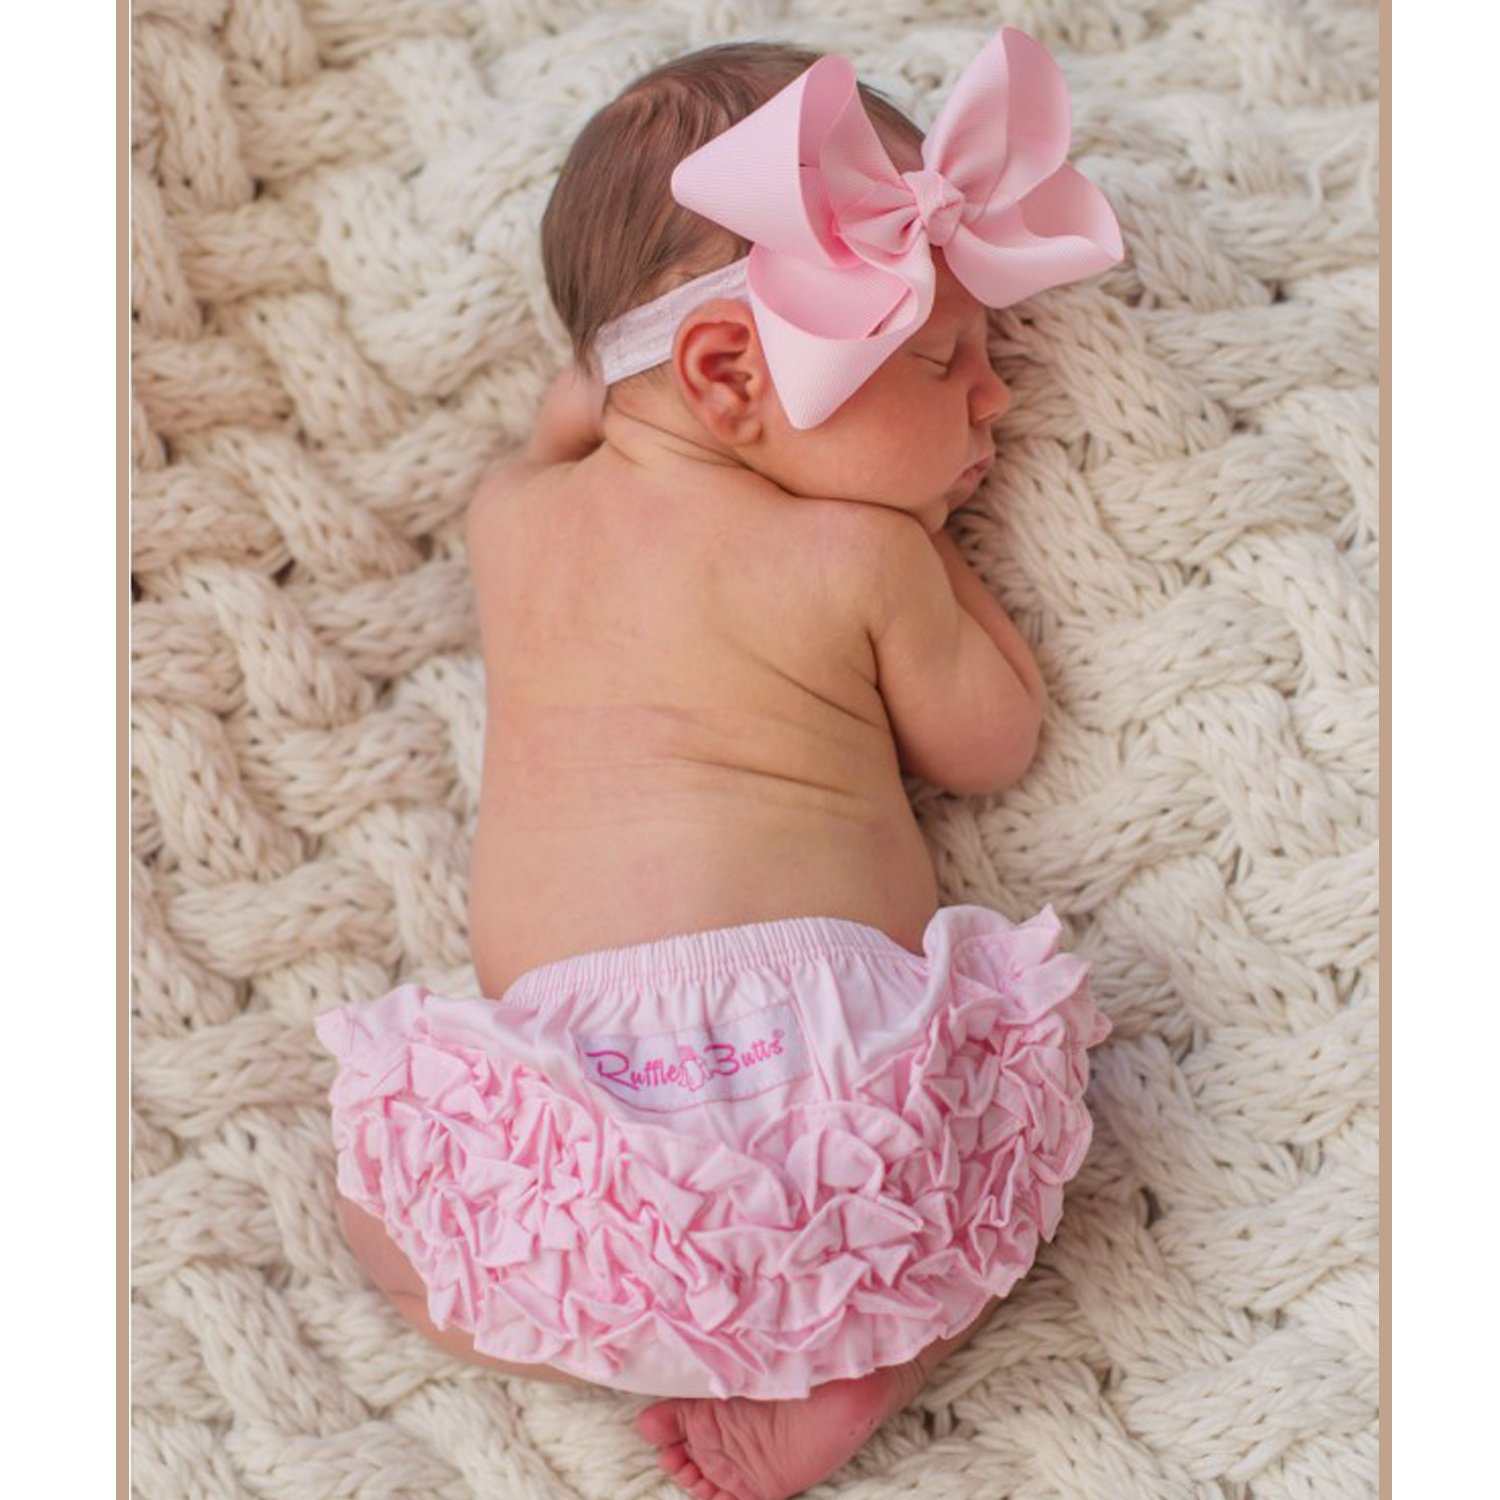 Ruffle Butts Diaper Cover-Pink